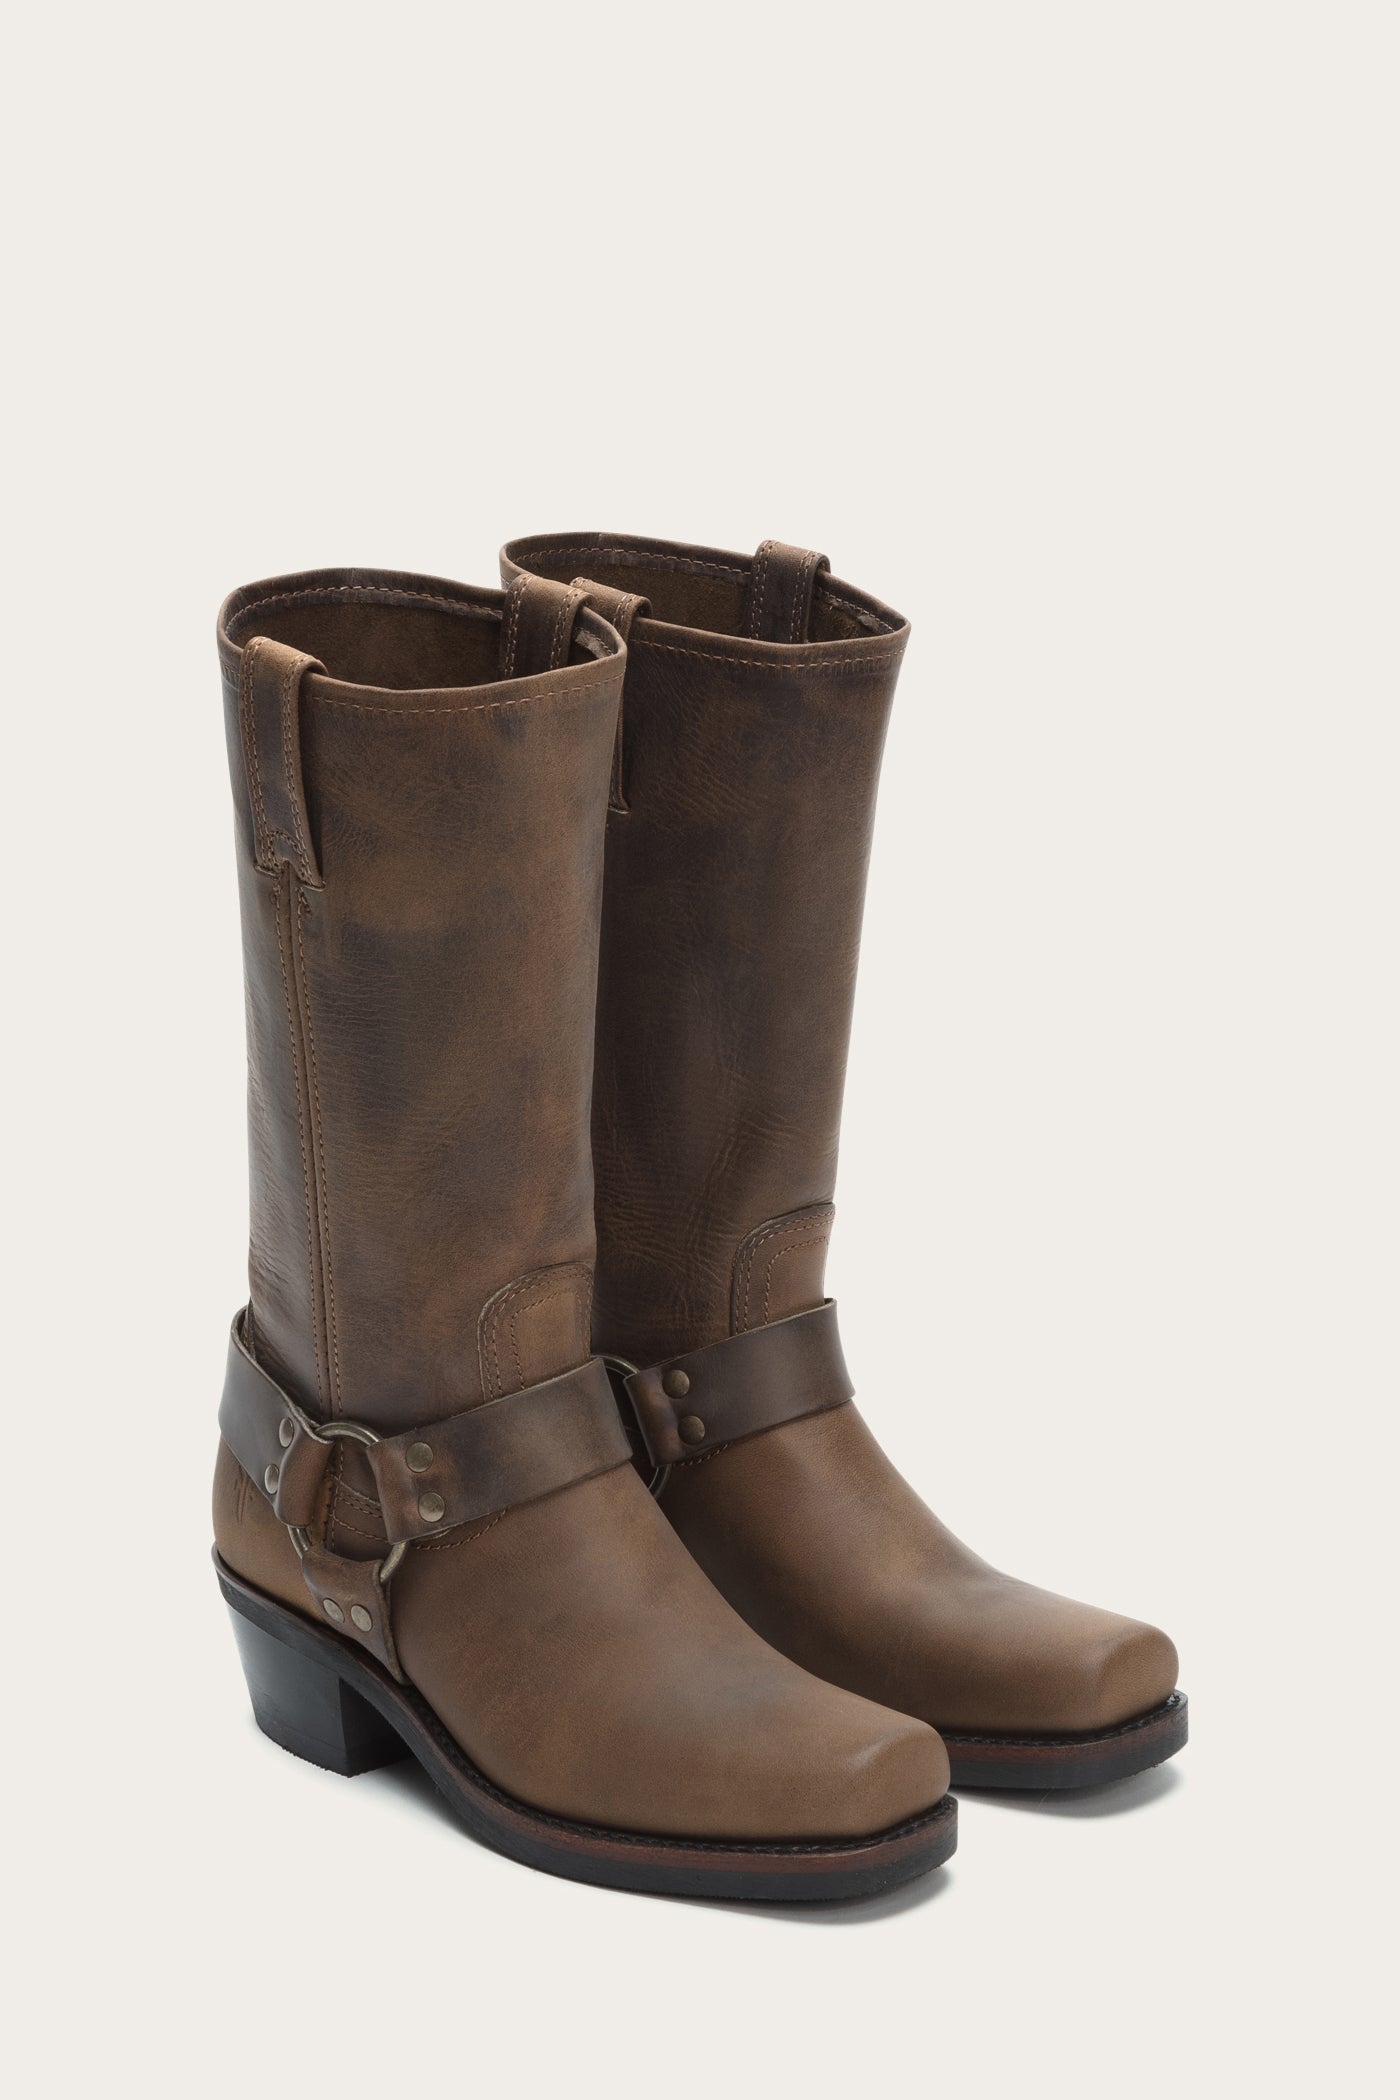 Buy > mens frye harness boots > in stock